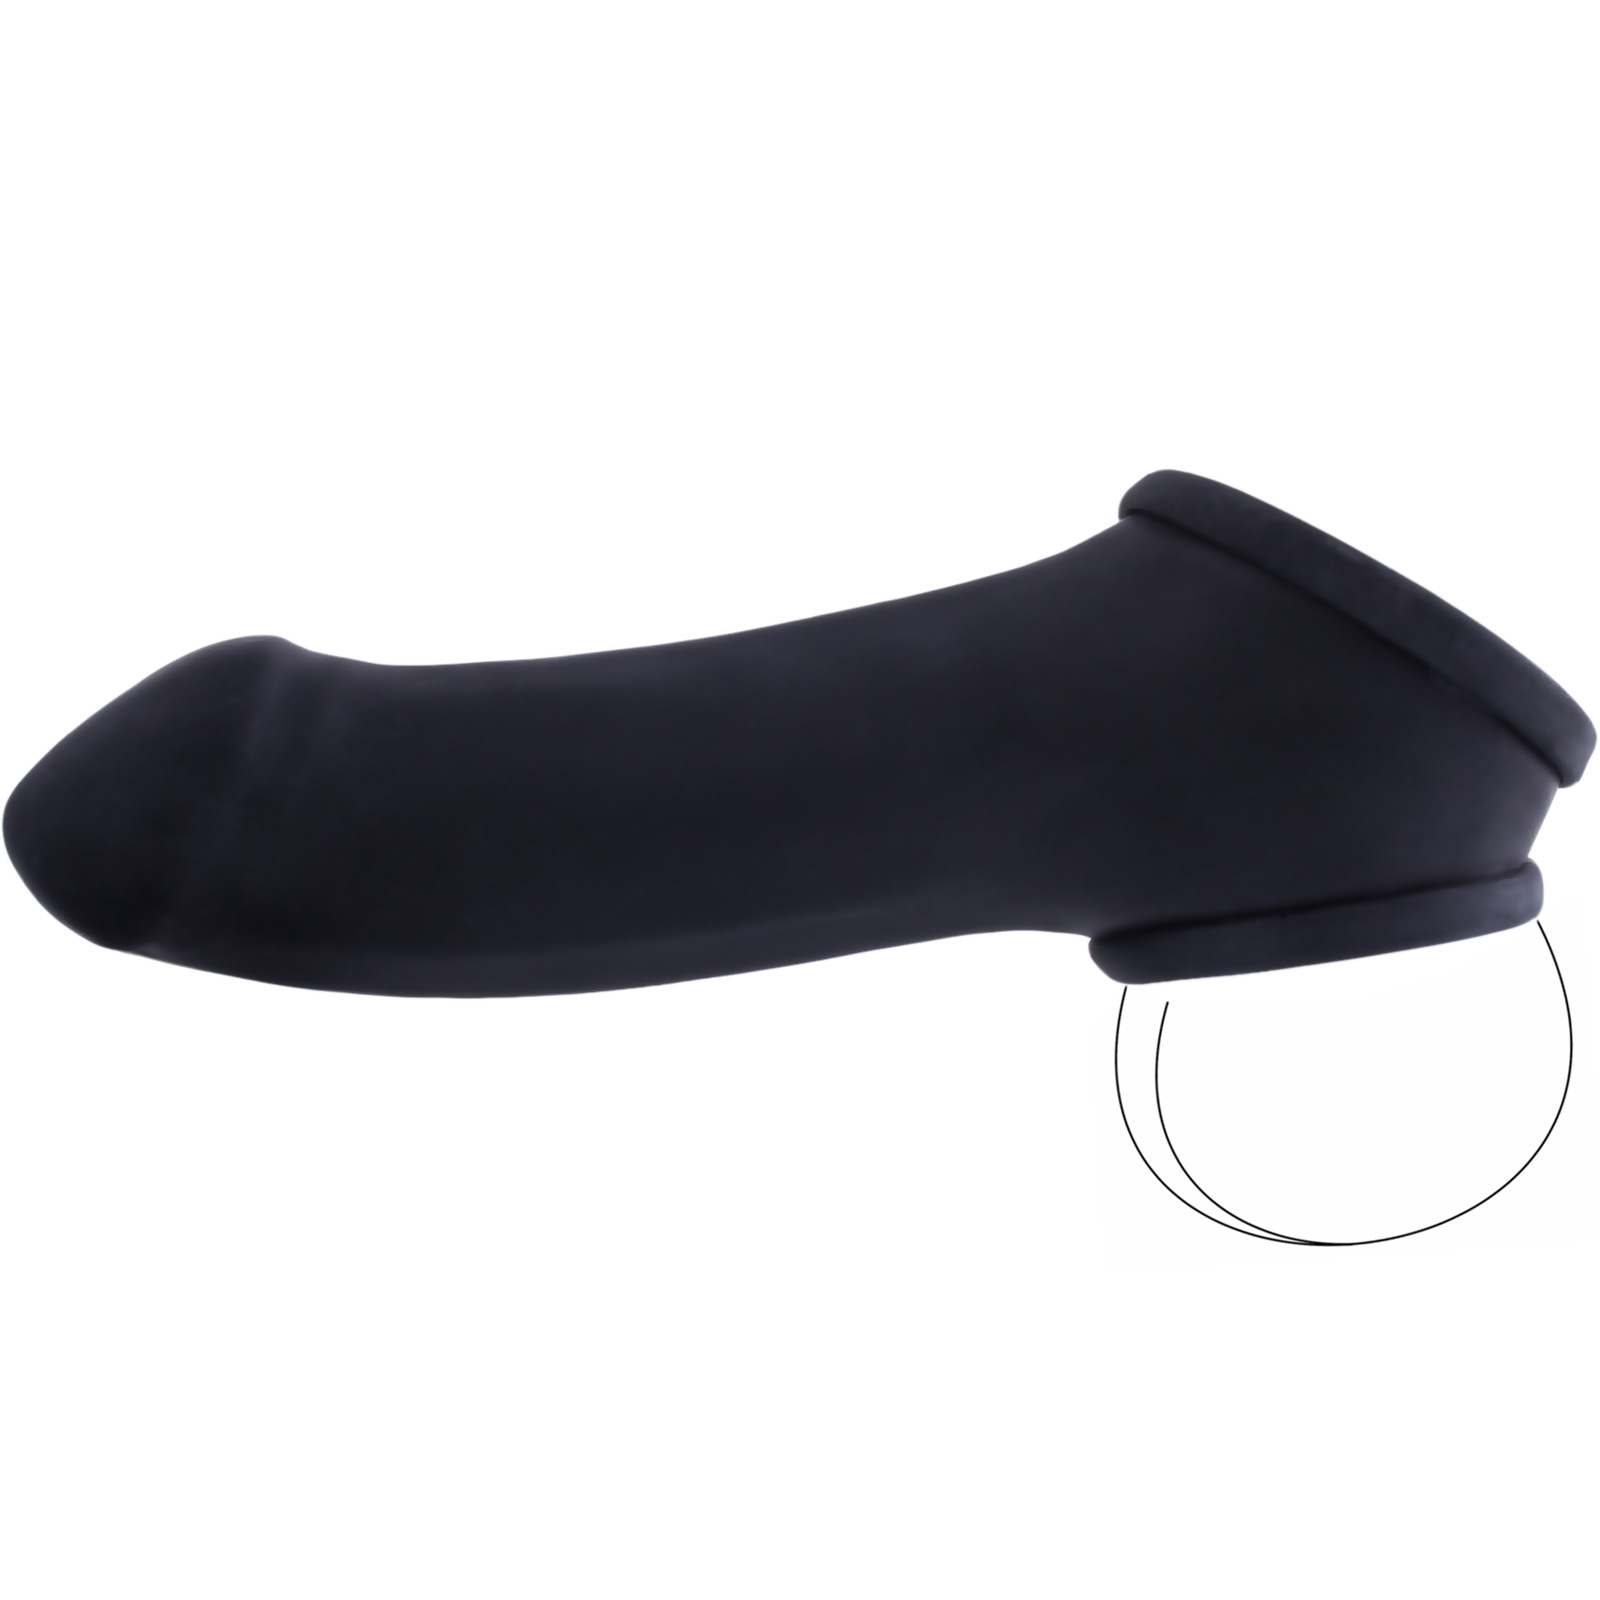 Toylie Latex Penis Sleeve «ERIK» black, with molded glans and testicle ring - suitable for vegans